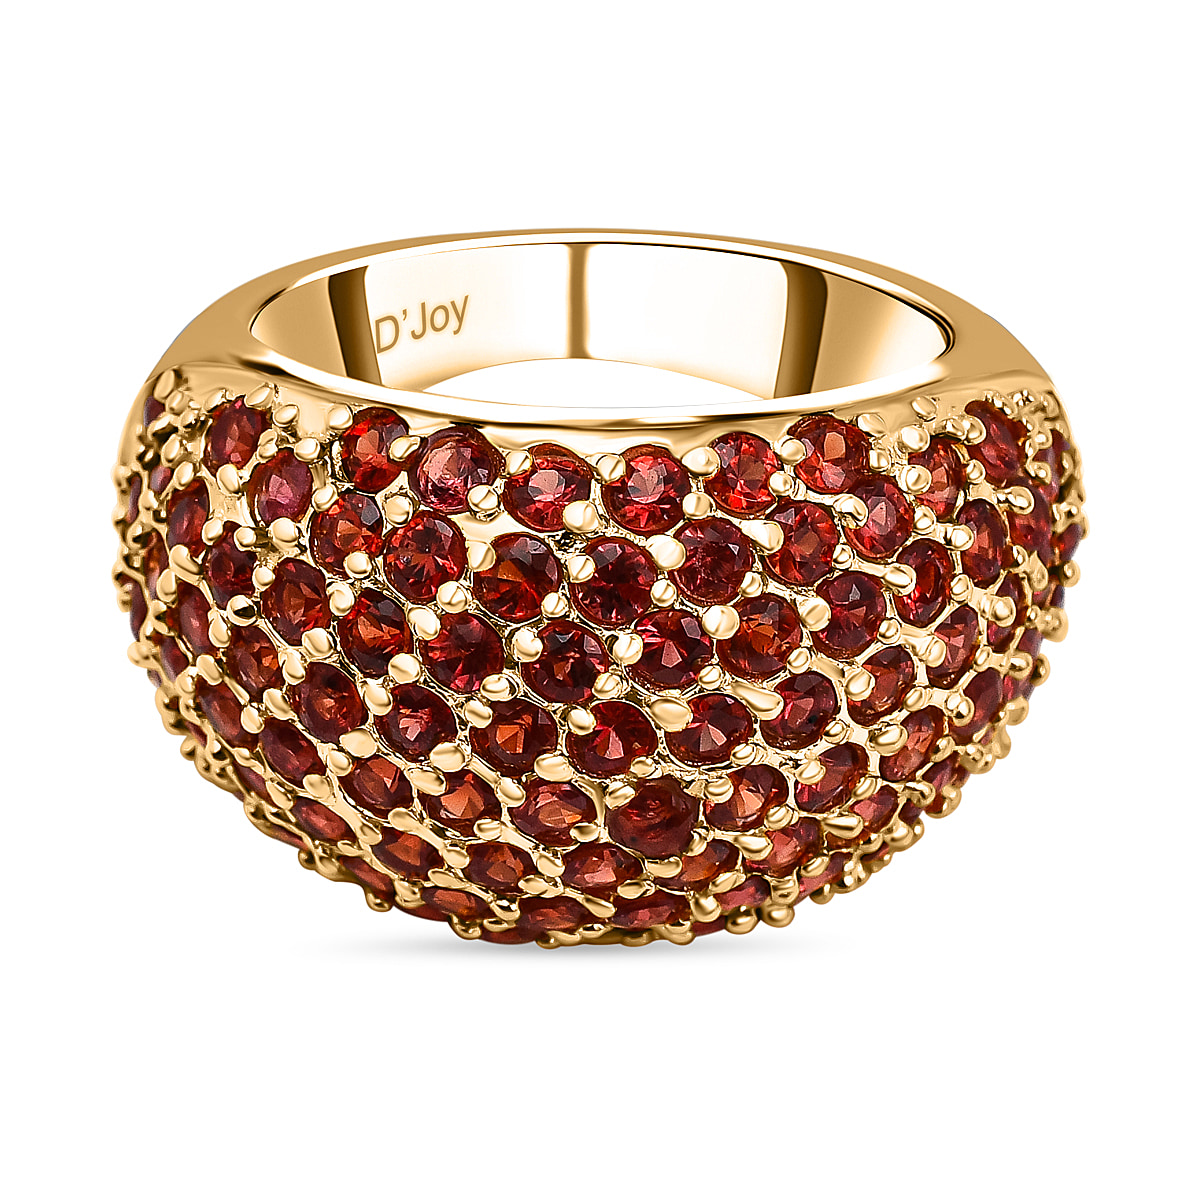 3.76 Ct. Red Sapphire Cluster Ring in Yellow Gold Plated Sterling Silver